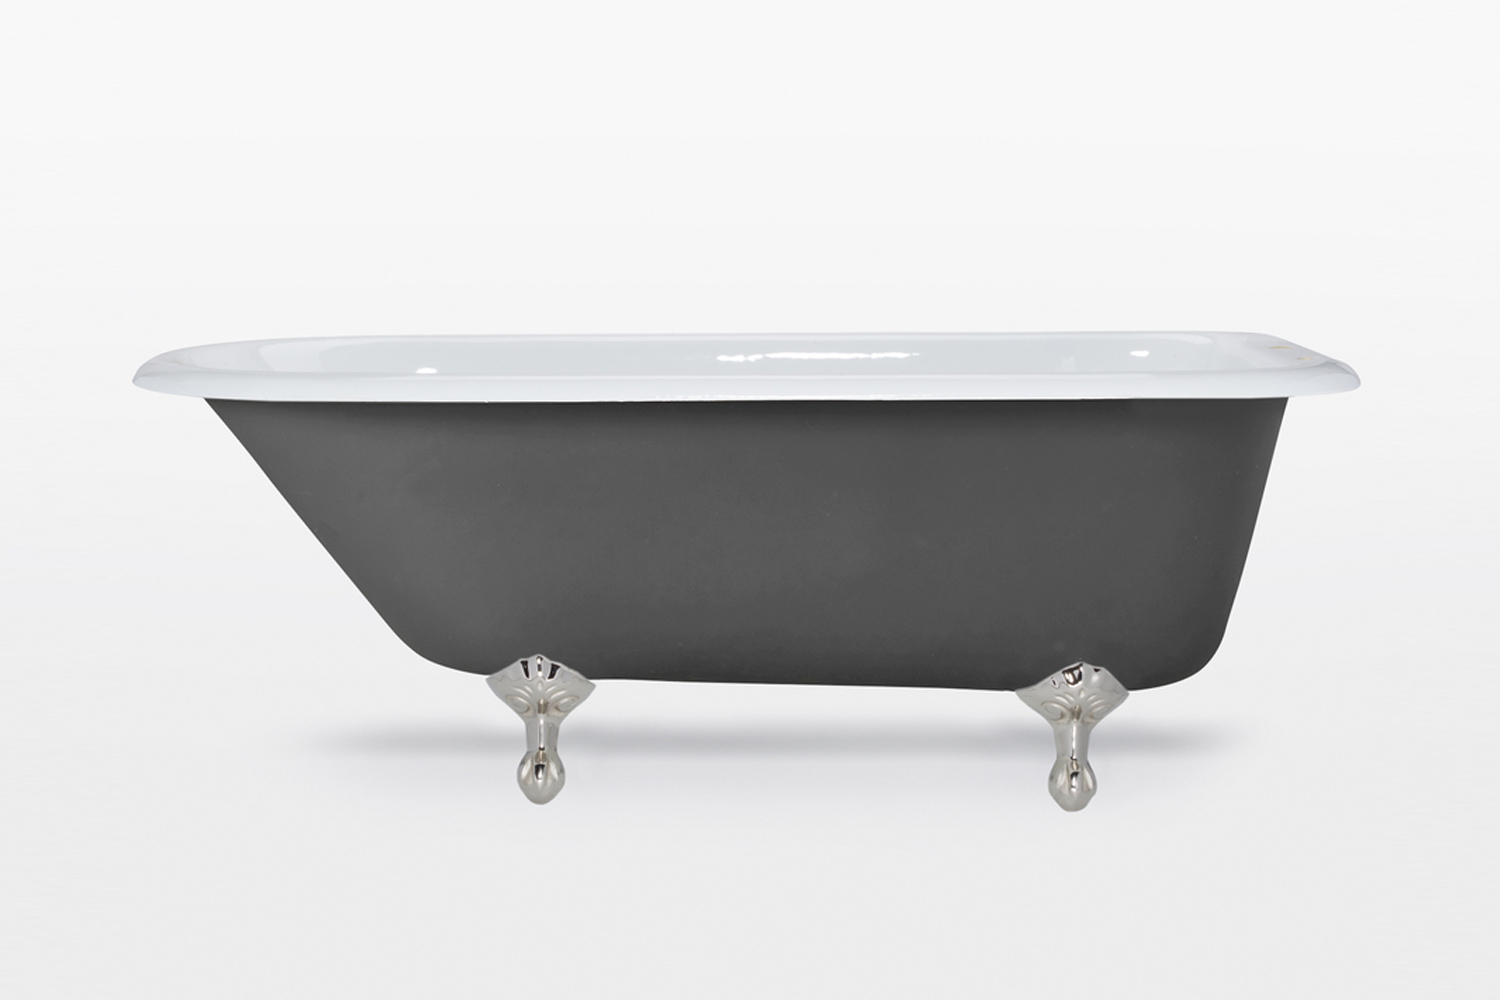 the rejuvenation 5 foot clawfoot tub with a gray exterior is $3,736. 14